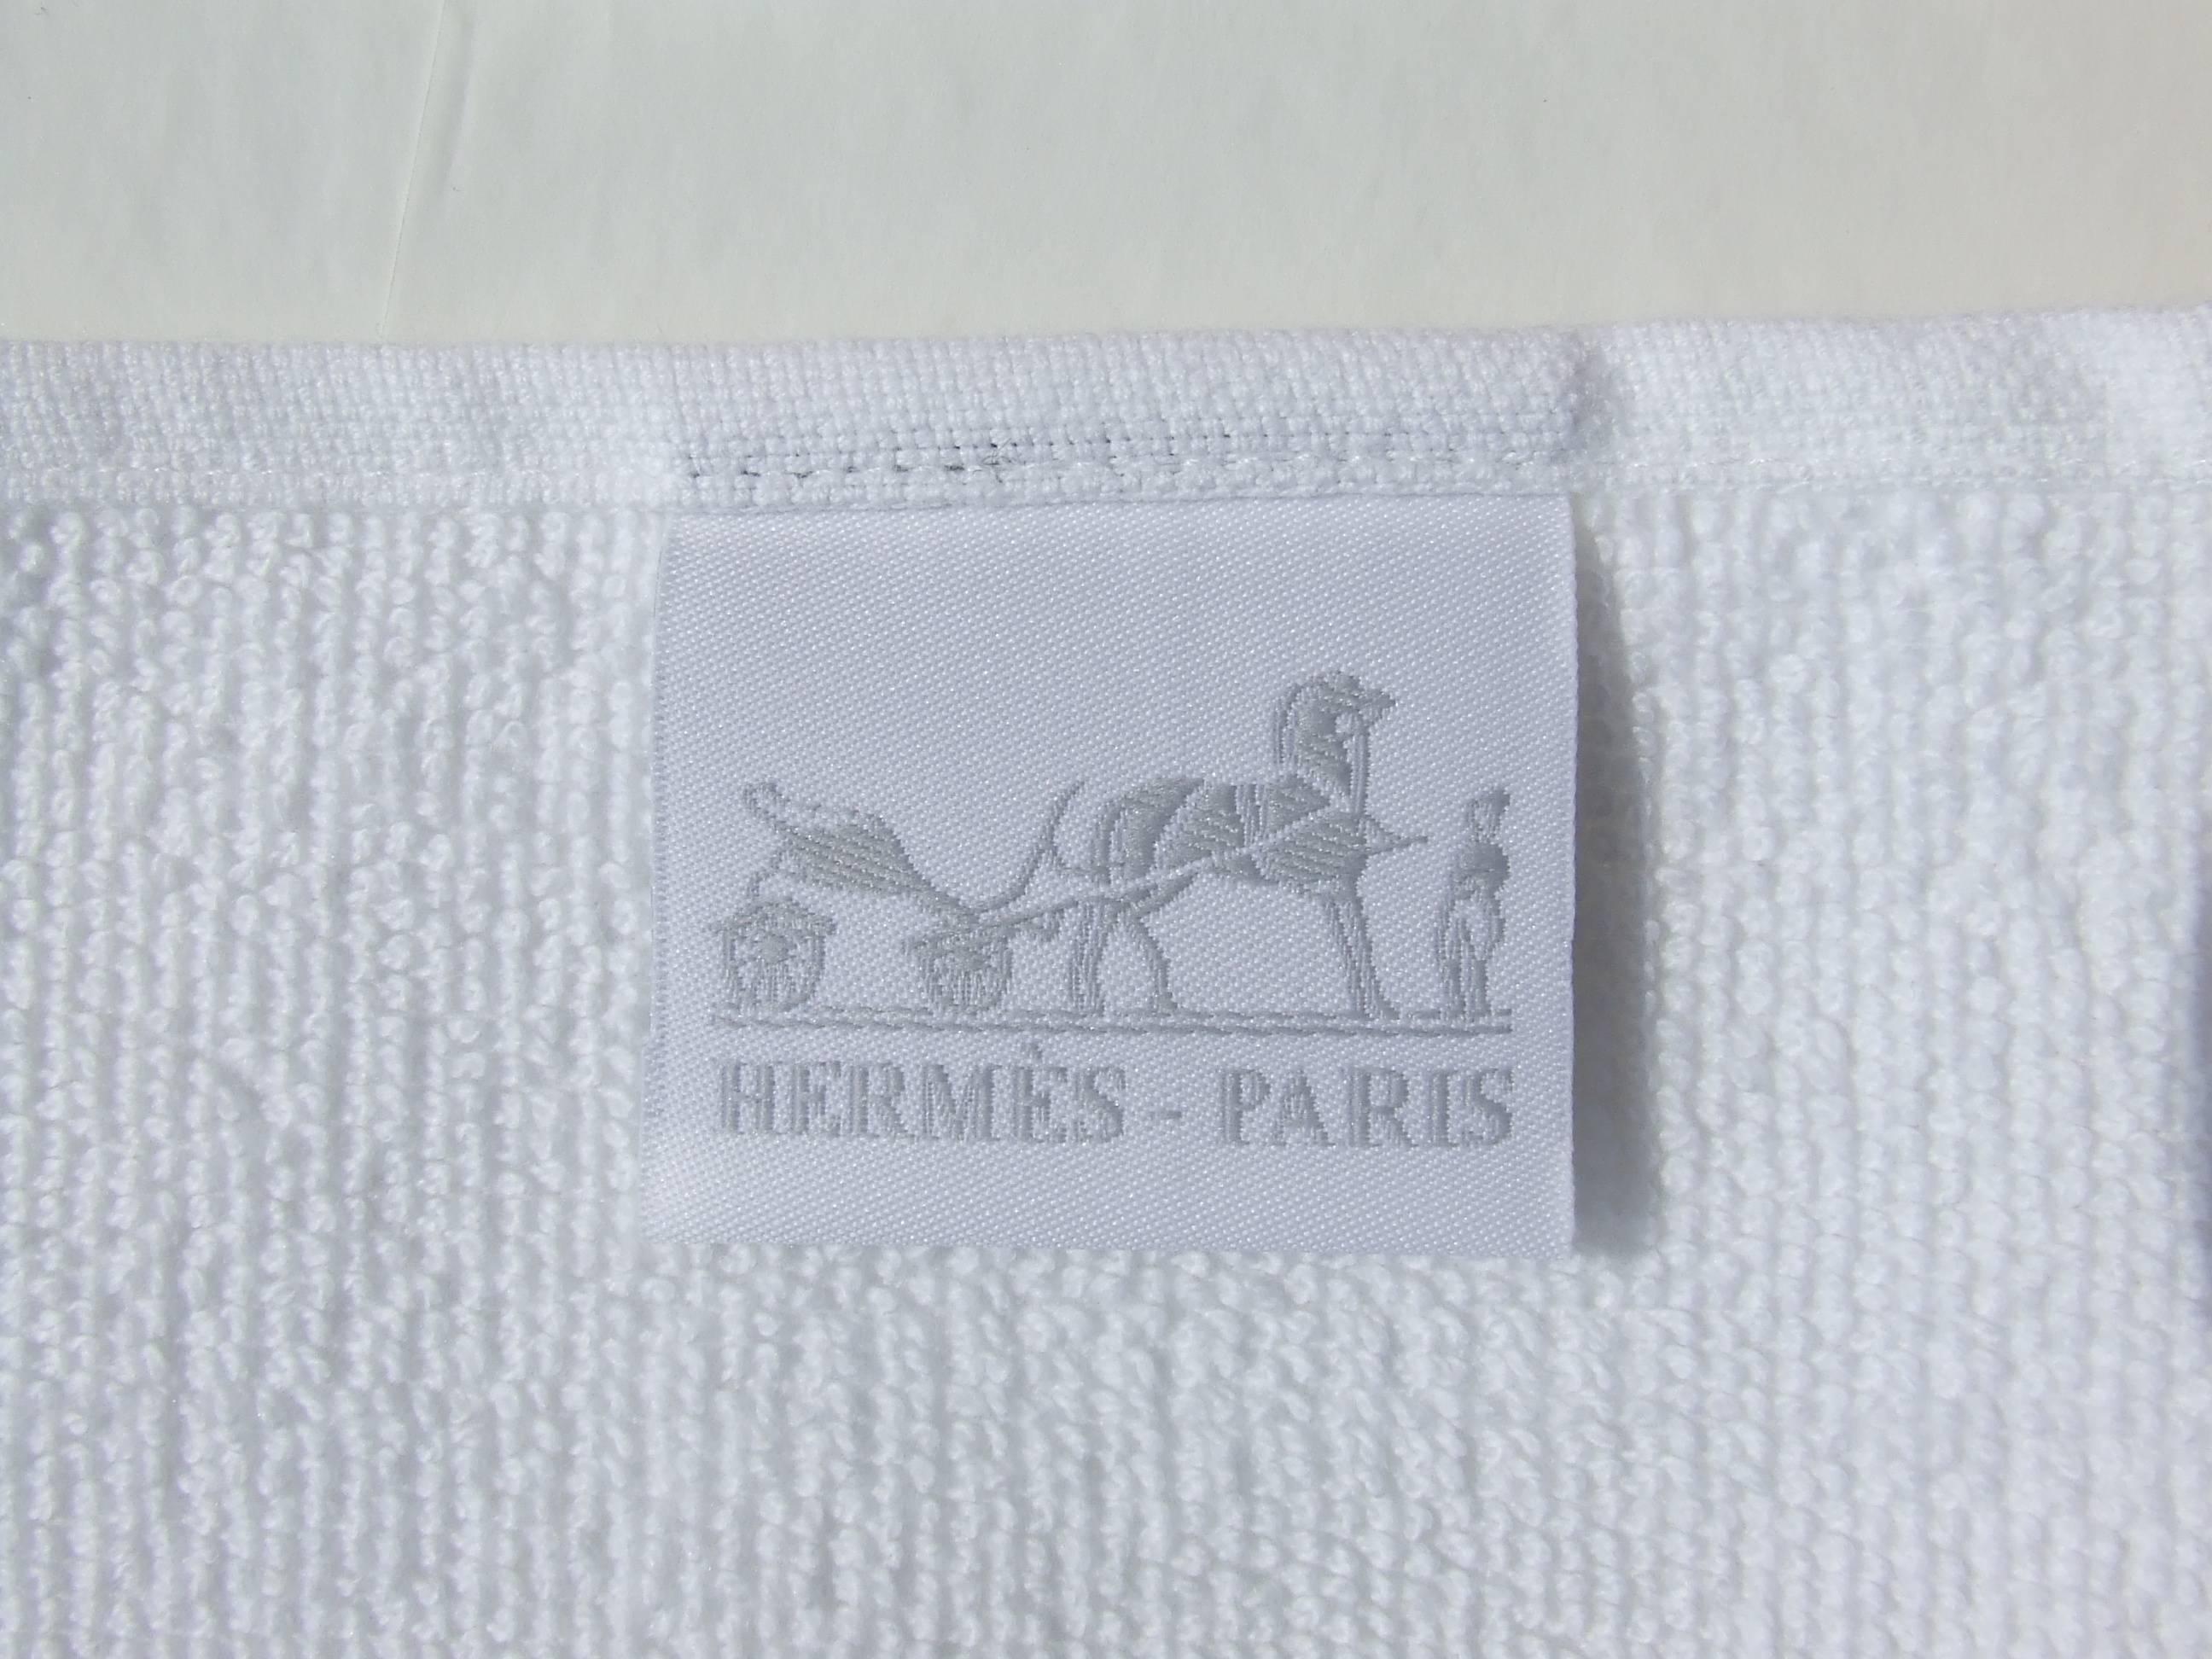 Hermès Set of Sports Towel and Sweatband Tennis Combed Cotton  2